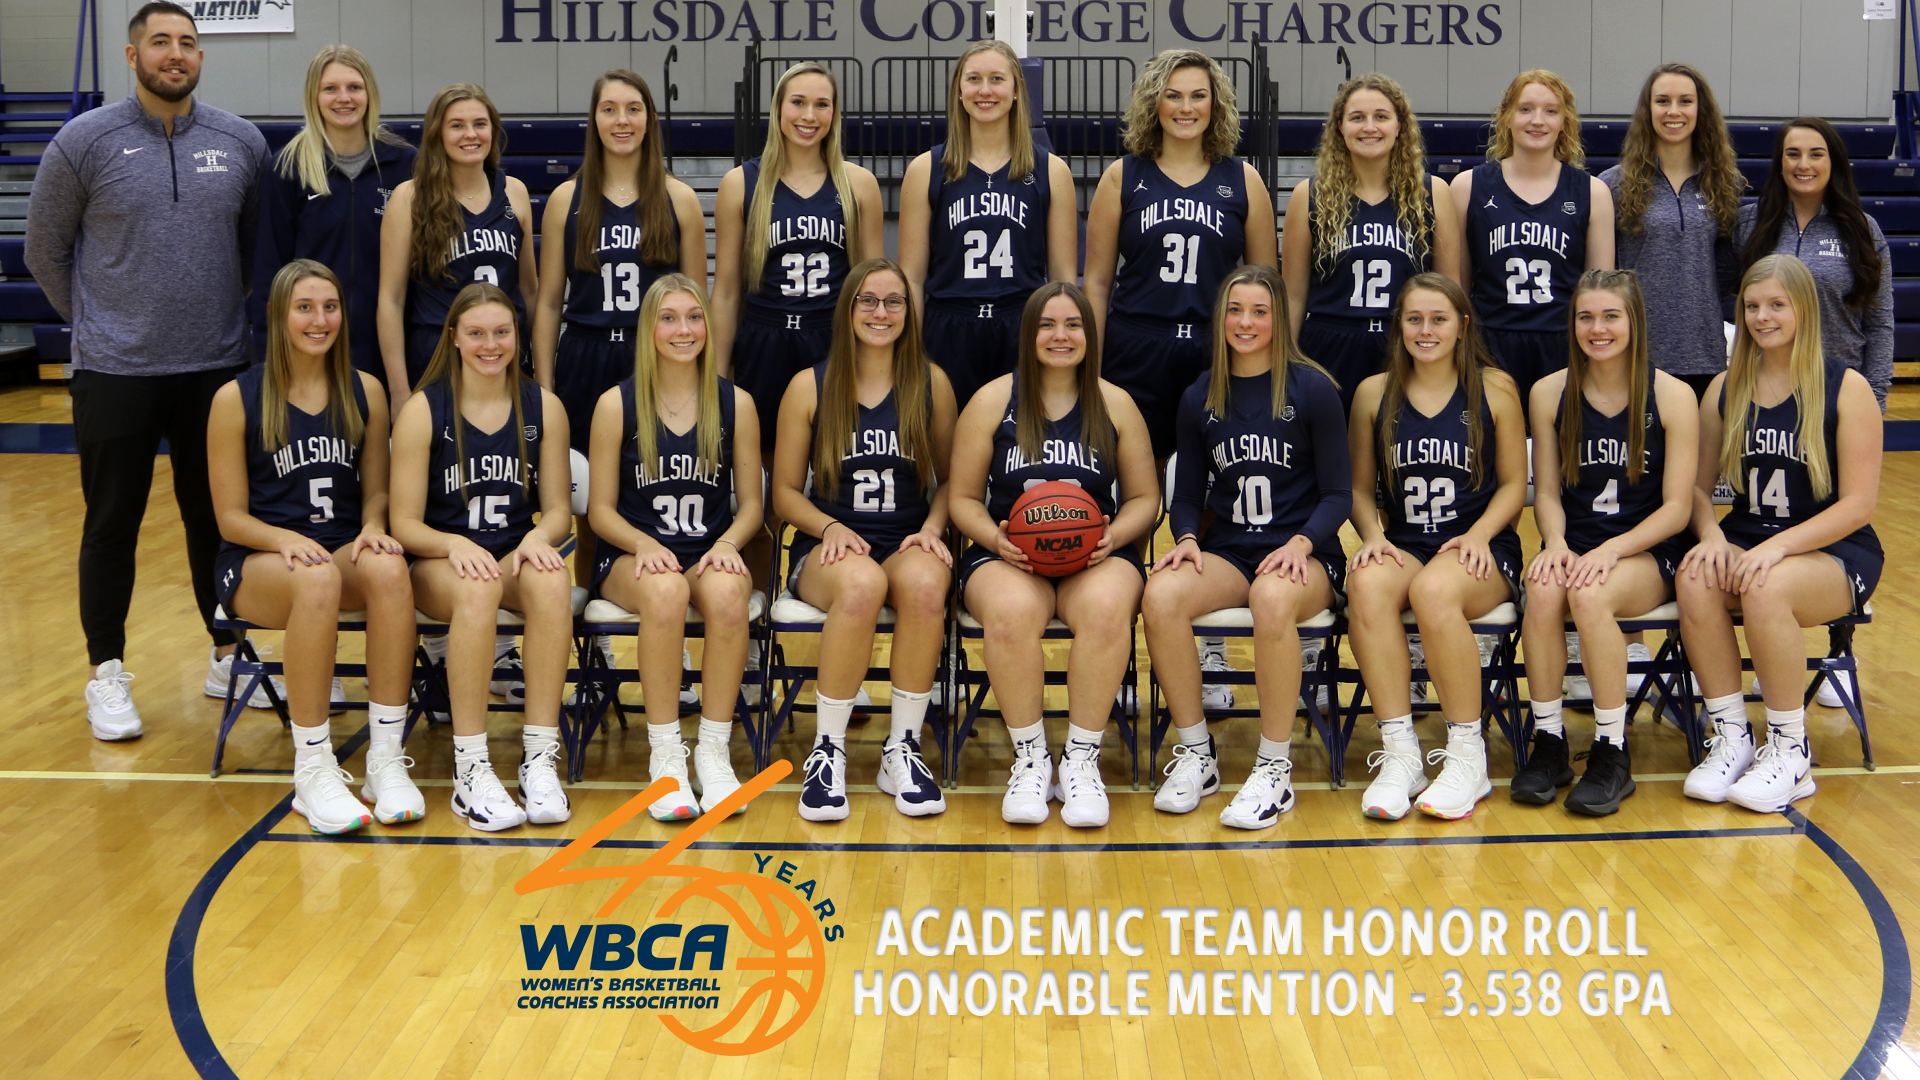 Chargers earn Academic Team Honor Roll Honorable Mention from WBCA